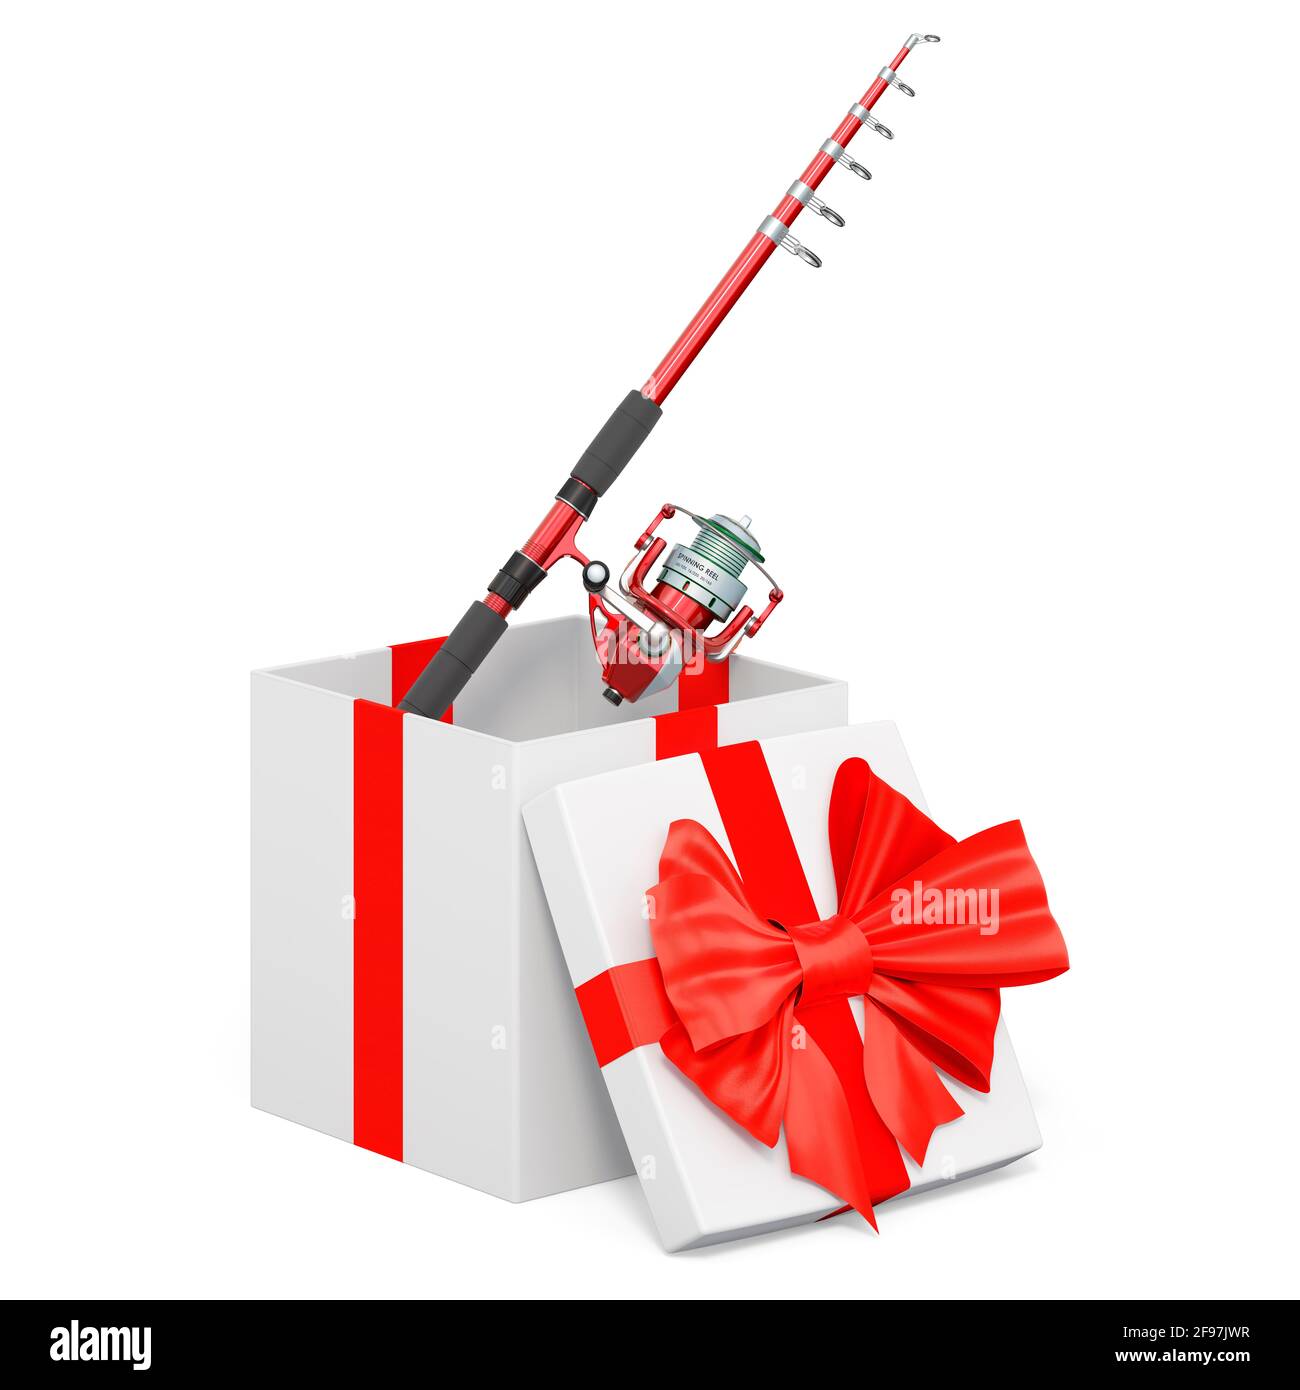 Fishing rod inside gift box, present concept. 3D rendering